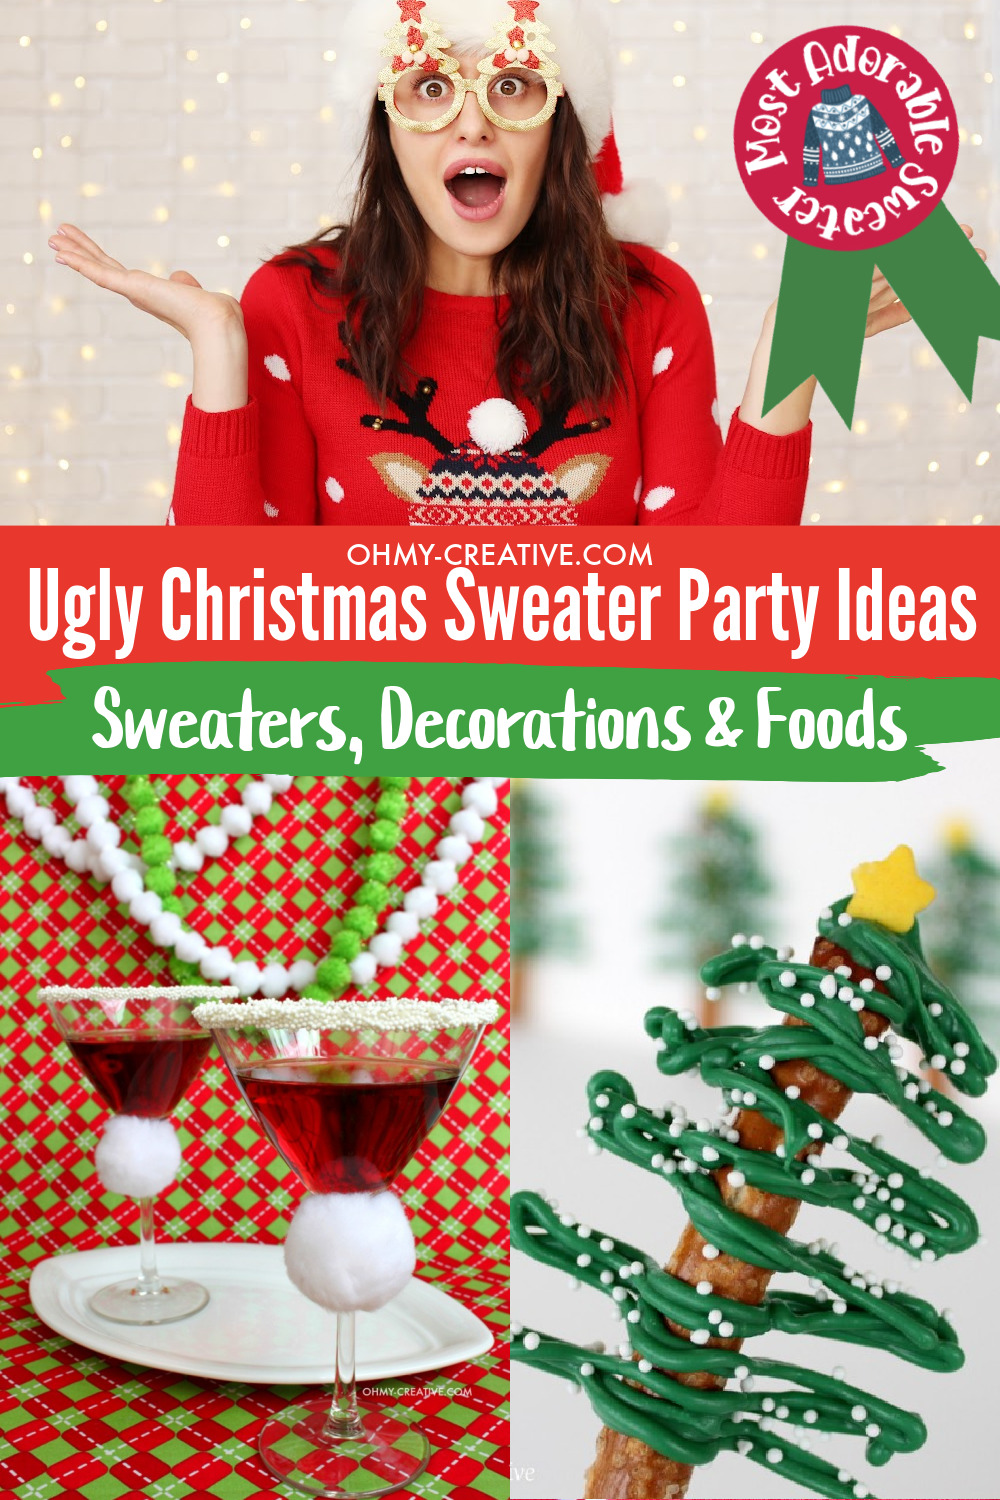 Fun Ugly Christmas Sweater Party Ideas and Christmas Party Food ideas